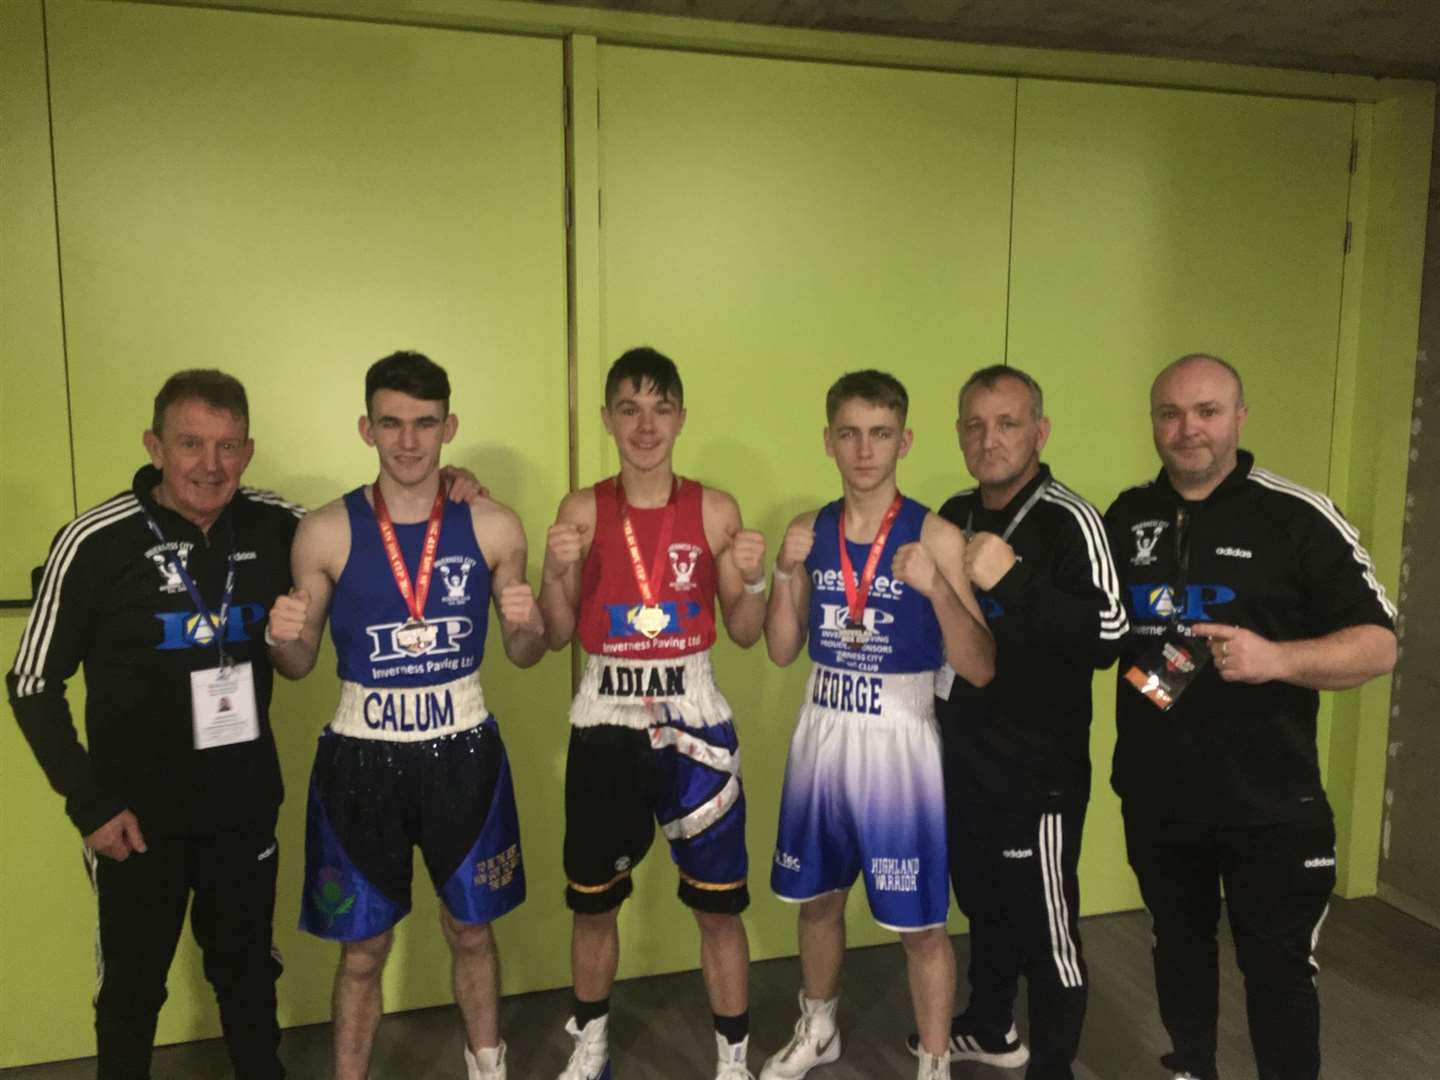 Inverness City Boxing Club (Calum Turnbull, George Stewart and Adian Williamson) took a gold medal and two bronze medals from the Odivelas Box Cup in Portugal.